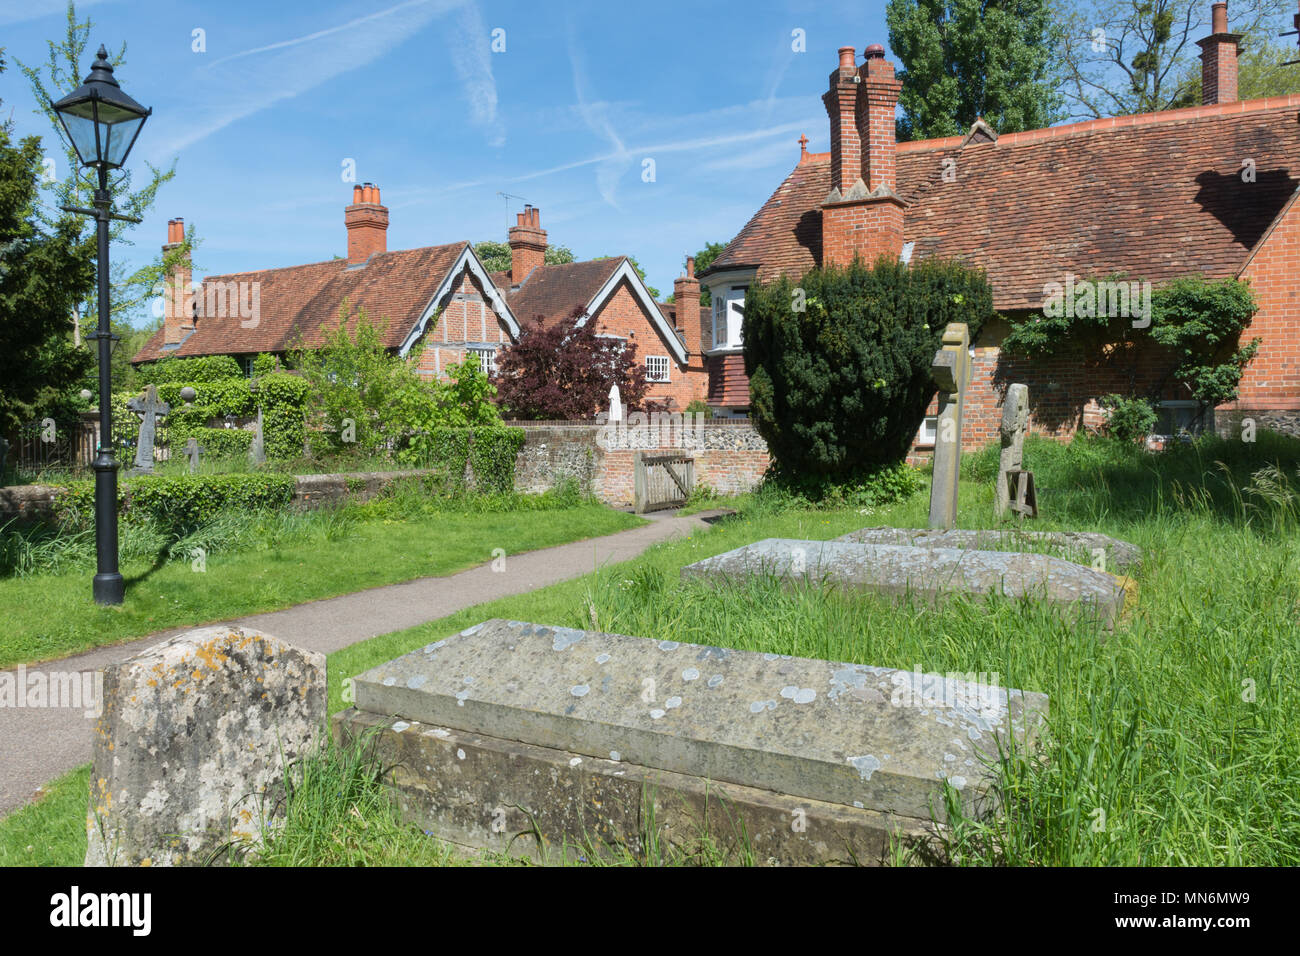 Cottages in the village of Goring-on-Thames in Oxfordshire, UK, from the churchyard of St Thomas church. Stock Photo